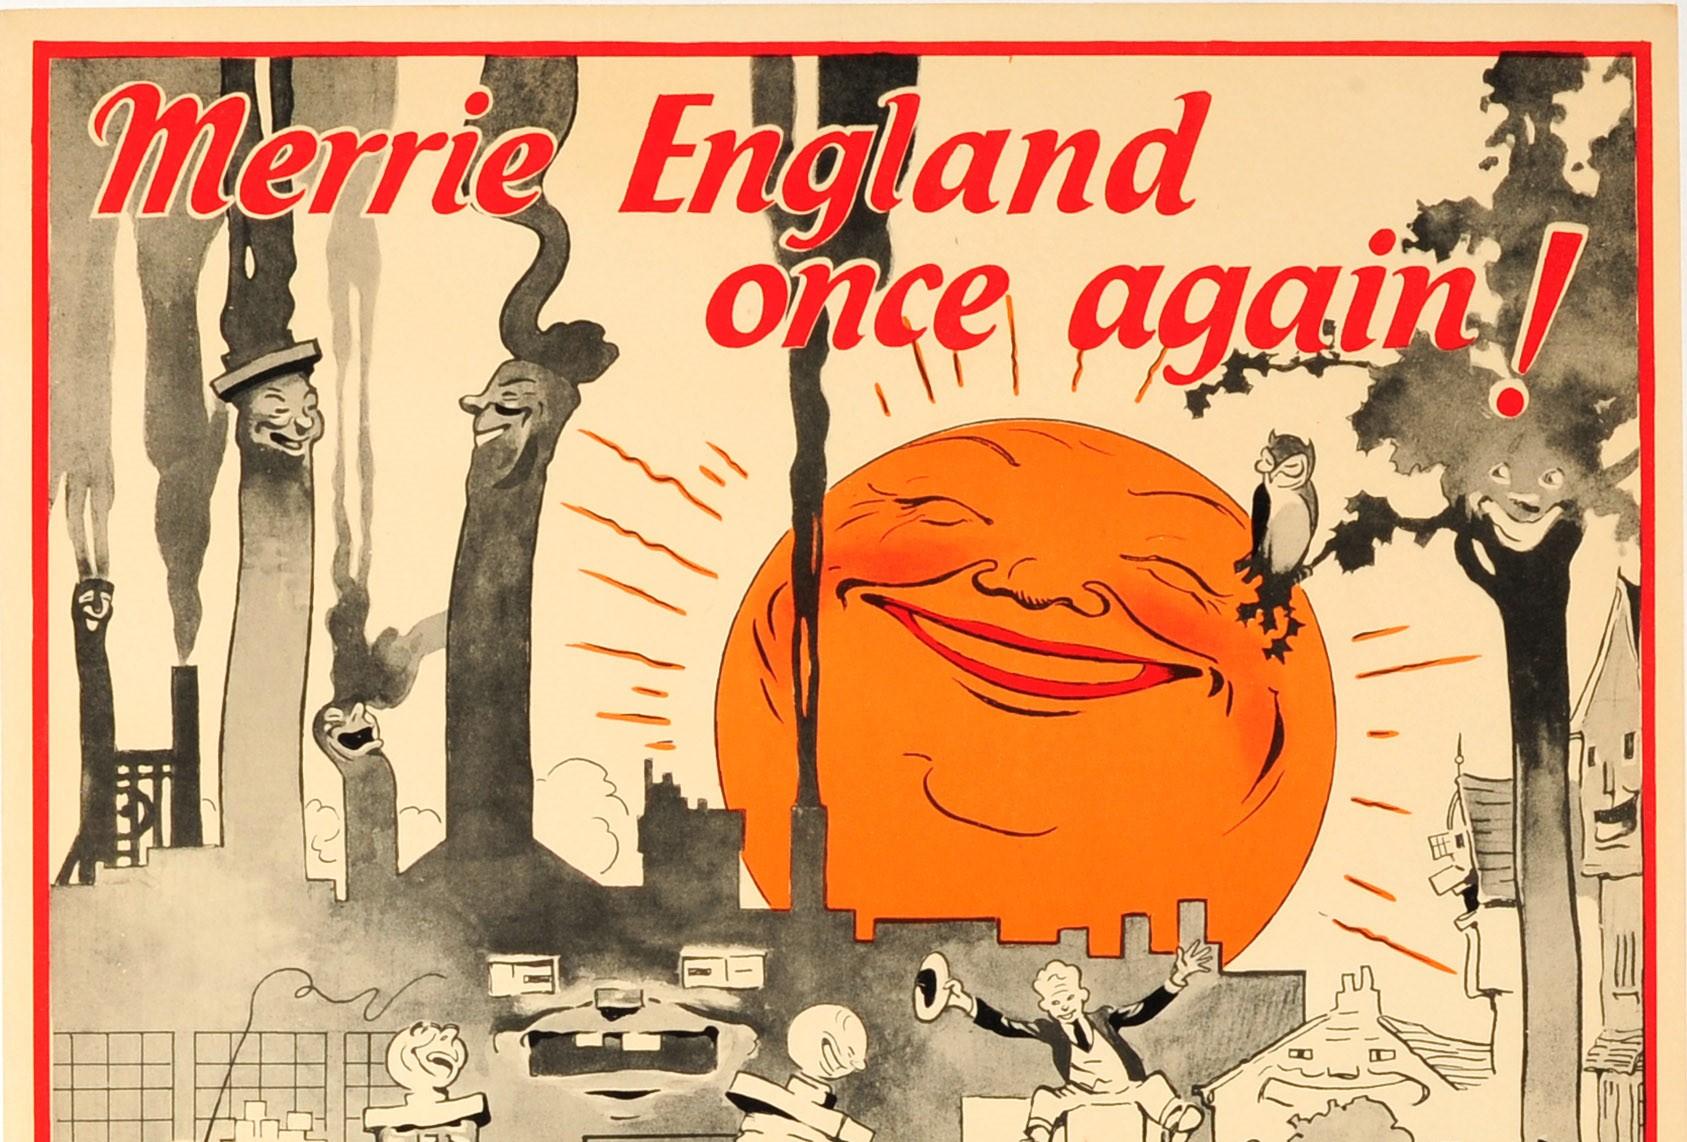 Original Vintage Buy British Poster - Merrie England Once Again! - British Trade - Print by Unknown